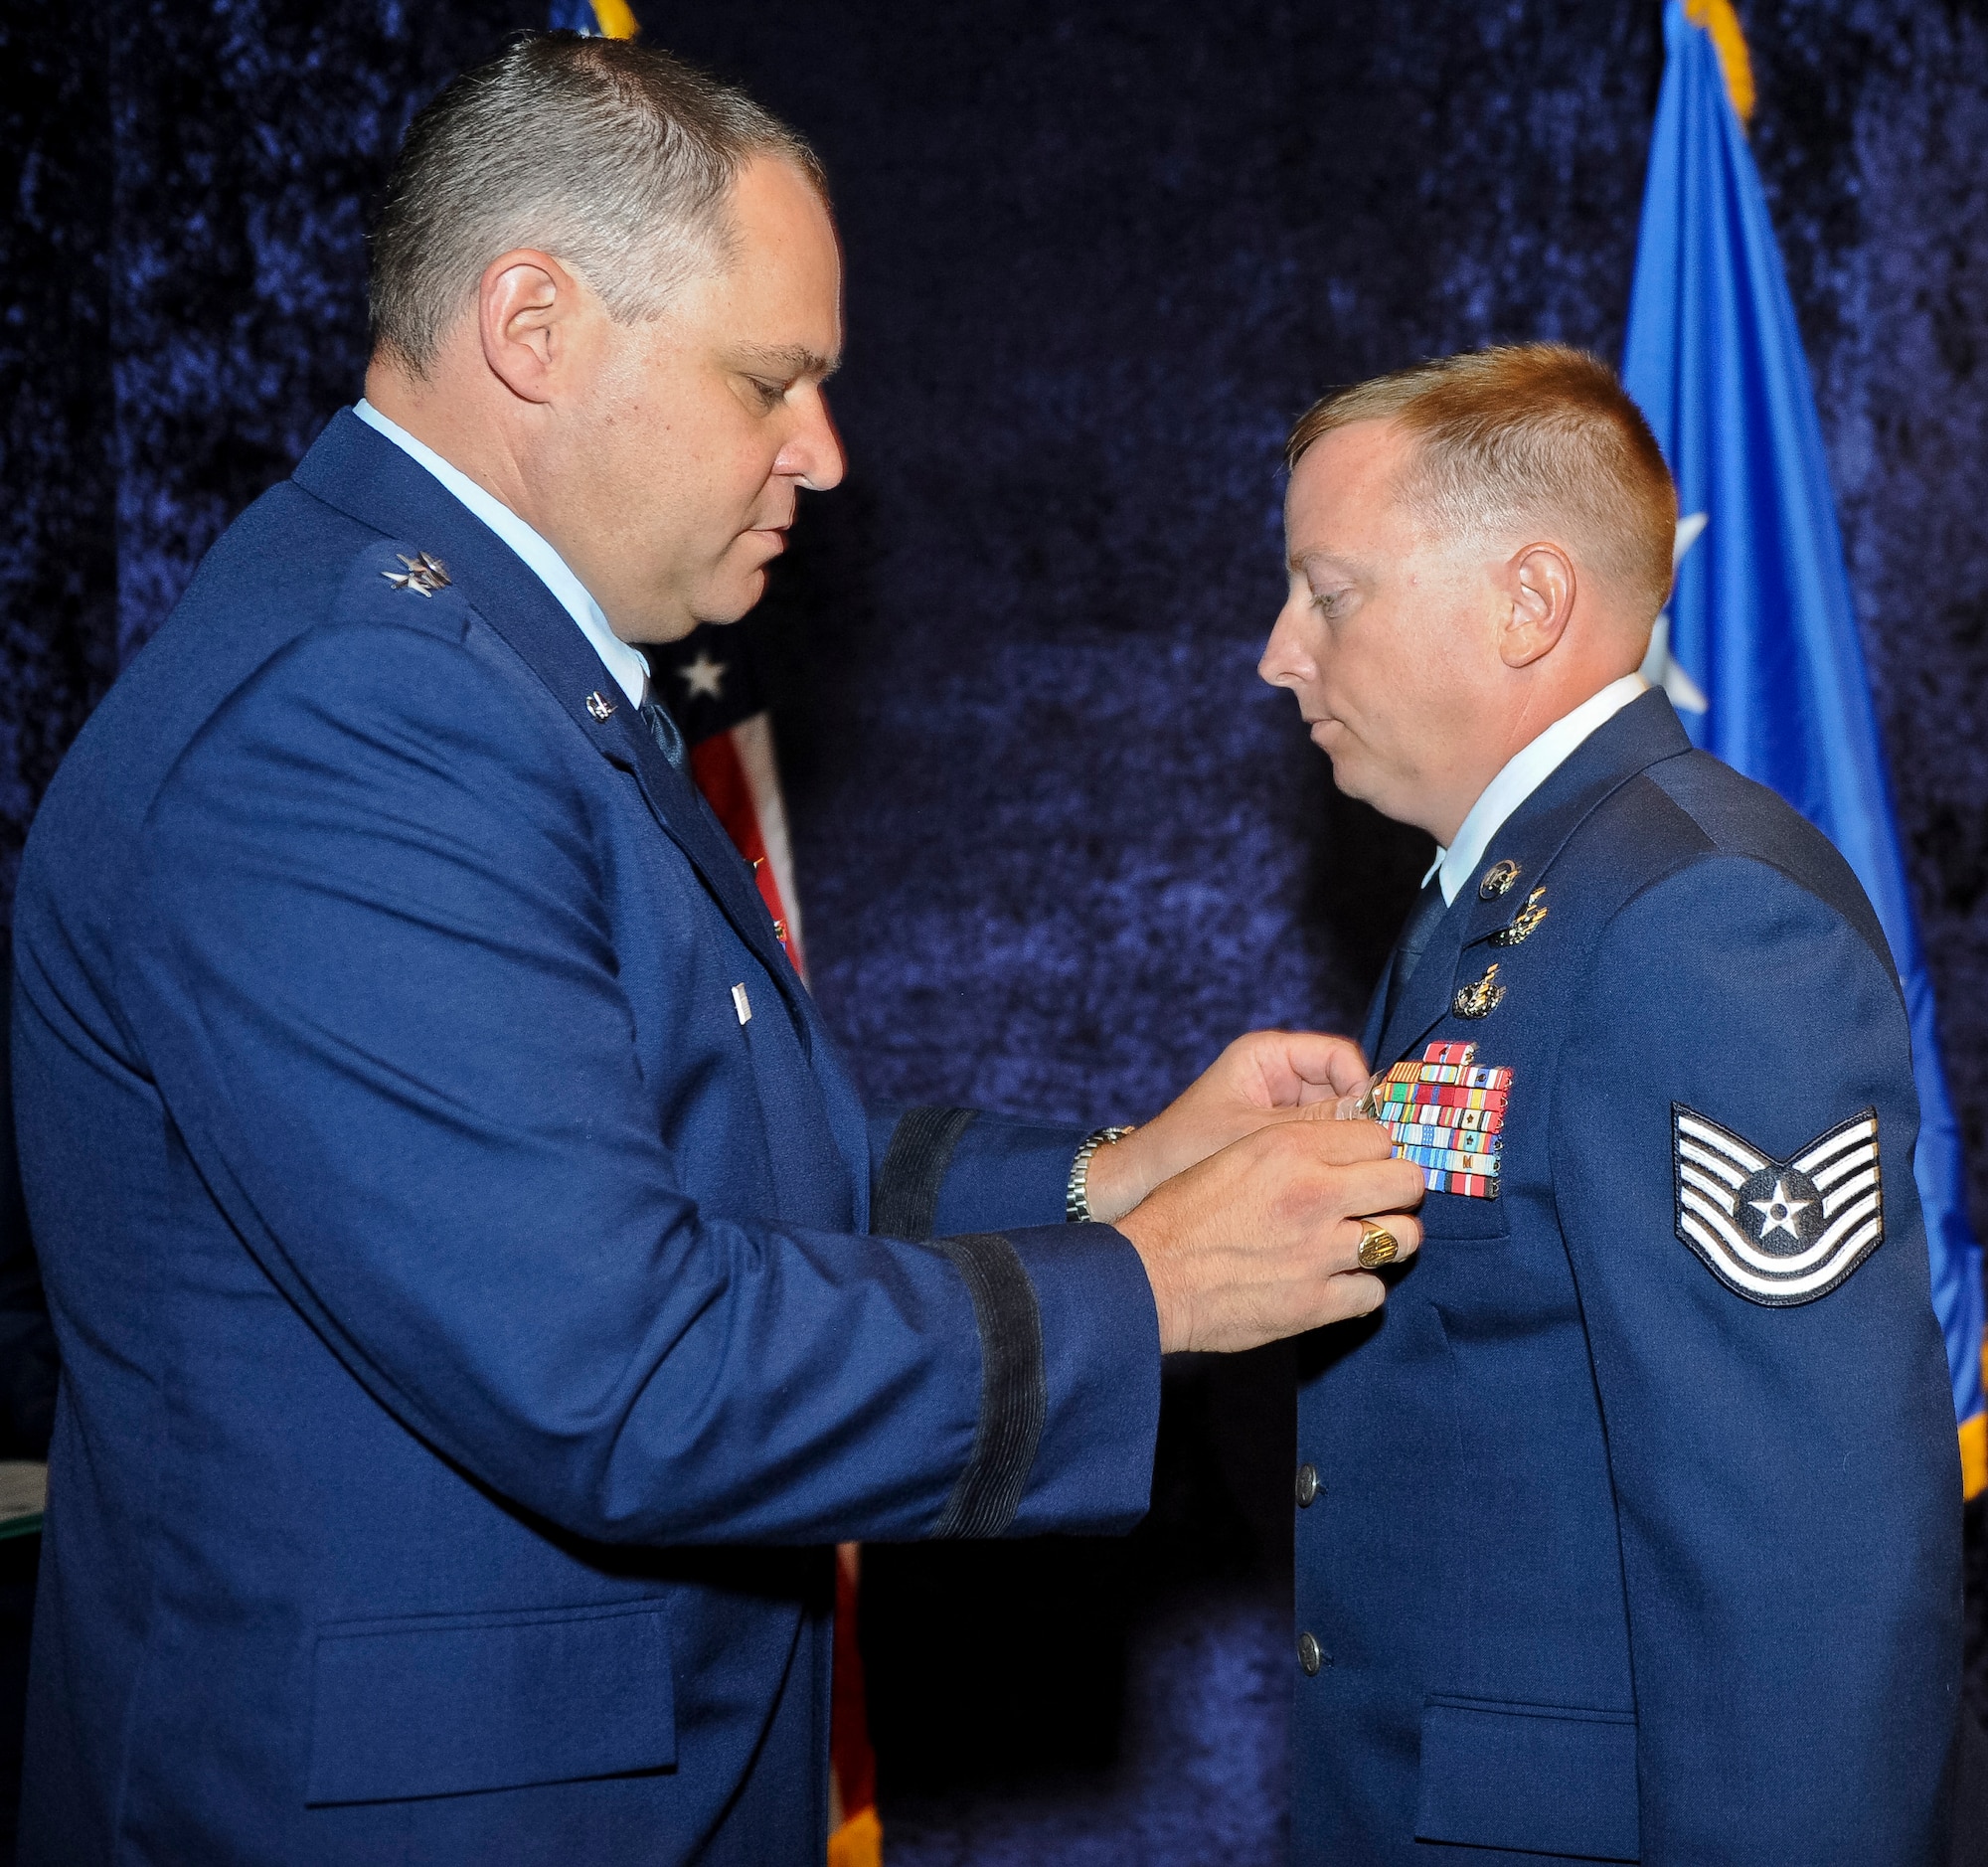 Maj. Gen. Jim Butterworth, Georgia National Guard adjutant general, pins a Bronze Star Medal on Tech. Sgt. Barry Duffield, 116th Civil Engineering Squadron explosive ordnance technician, during a ceremony at the Museum of Aviation, Robins Air Force Base, Ga., June 18, 2012.  Duffield received the medal, his 2nd, for his achievements while serving as an explosive ordnance disposal team leader in Afghanistan during a six-month period from 2011 to 2012.  ( National Guard photo by Master Sgt. Roger Parsons/Released)